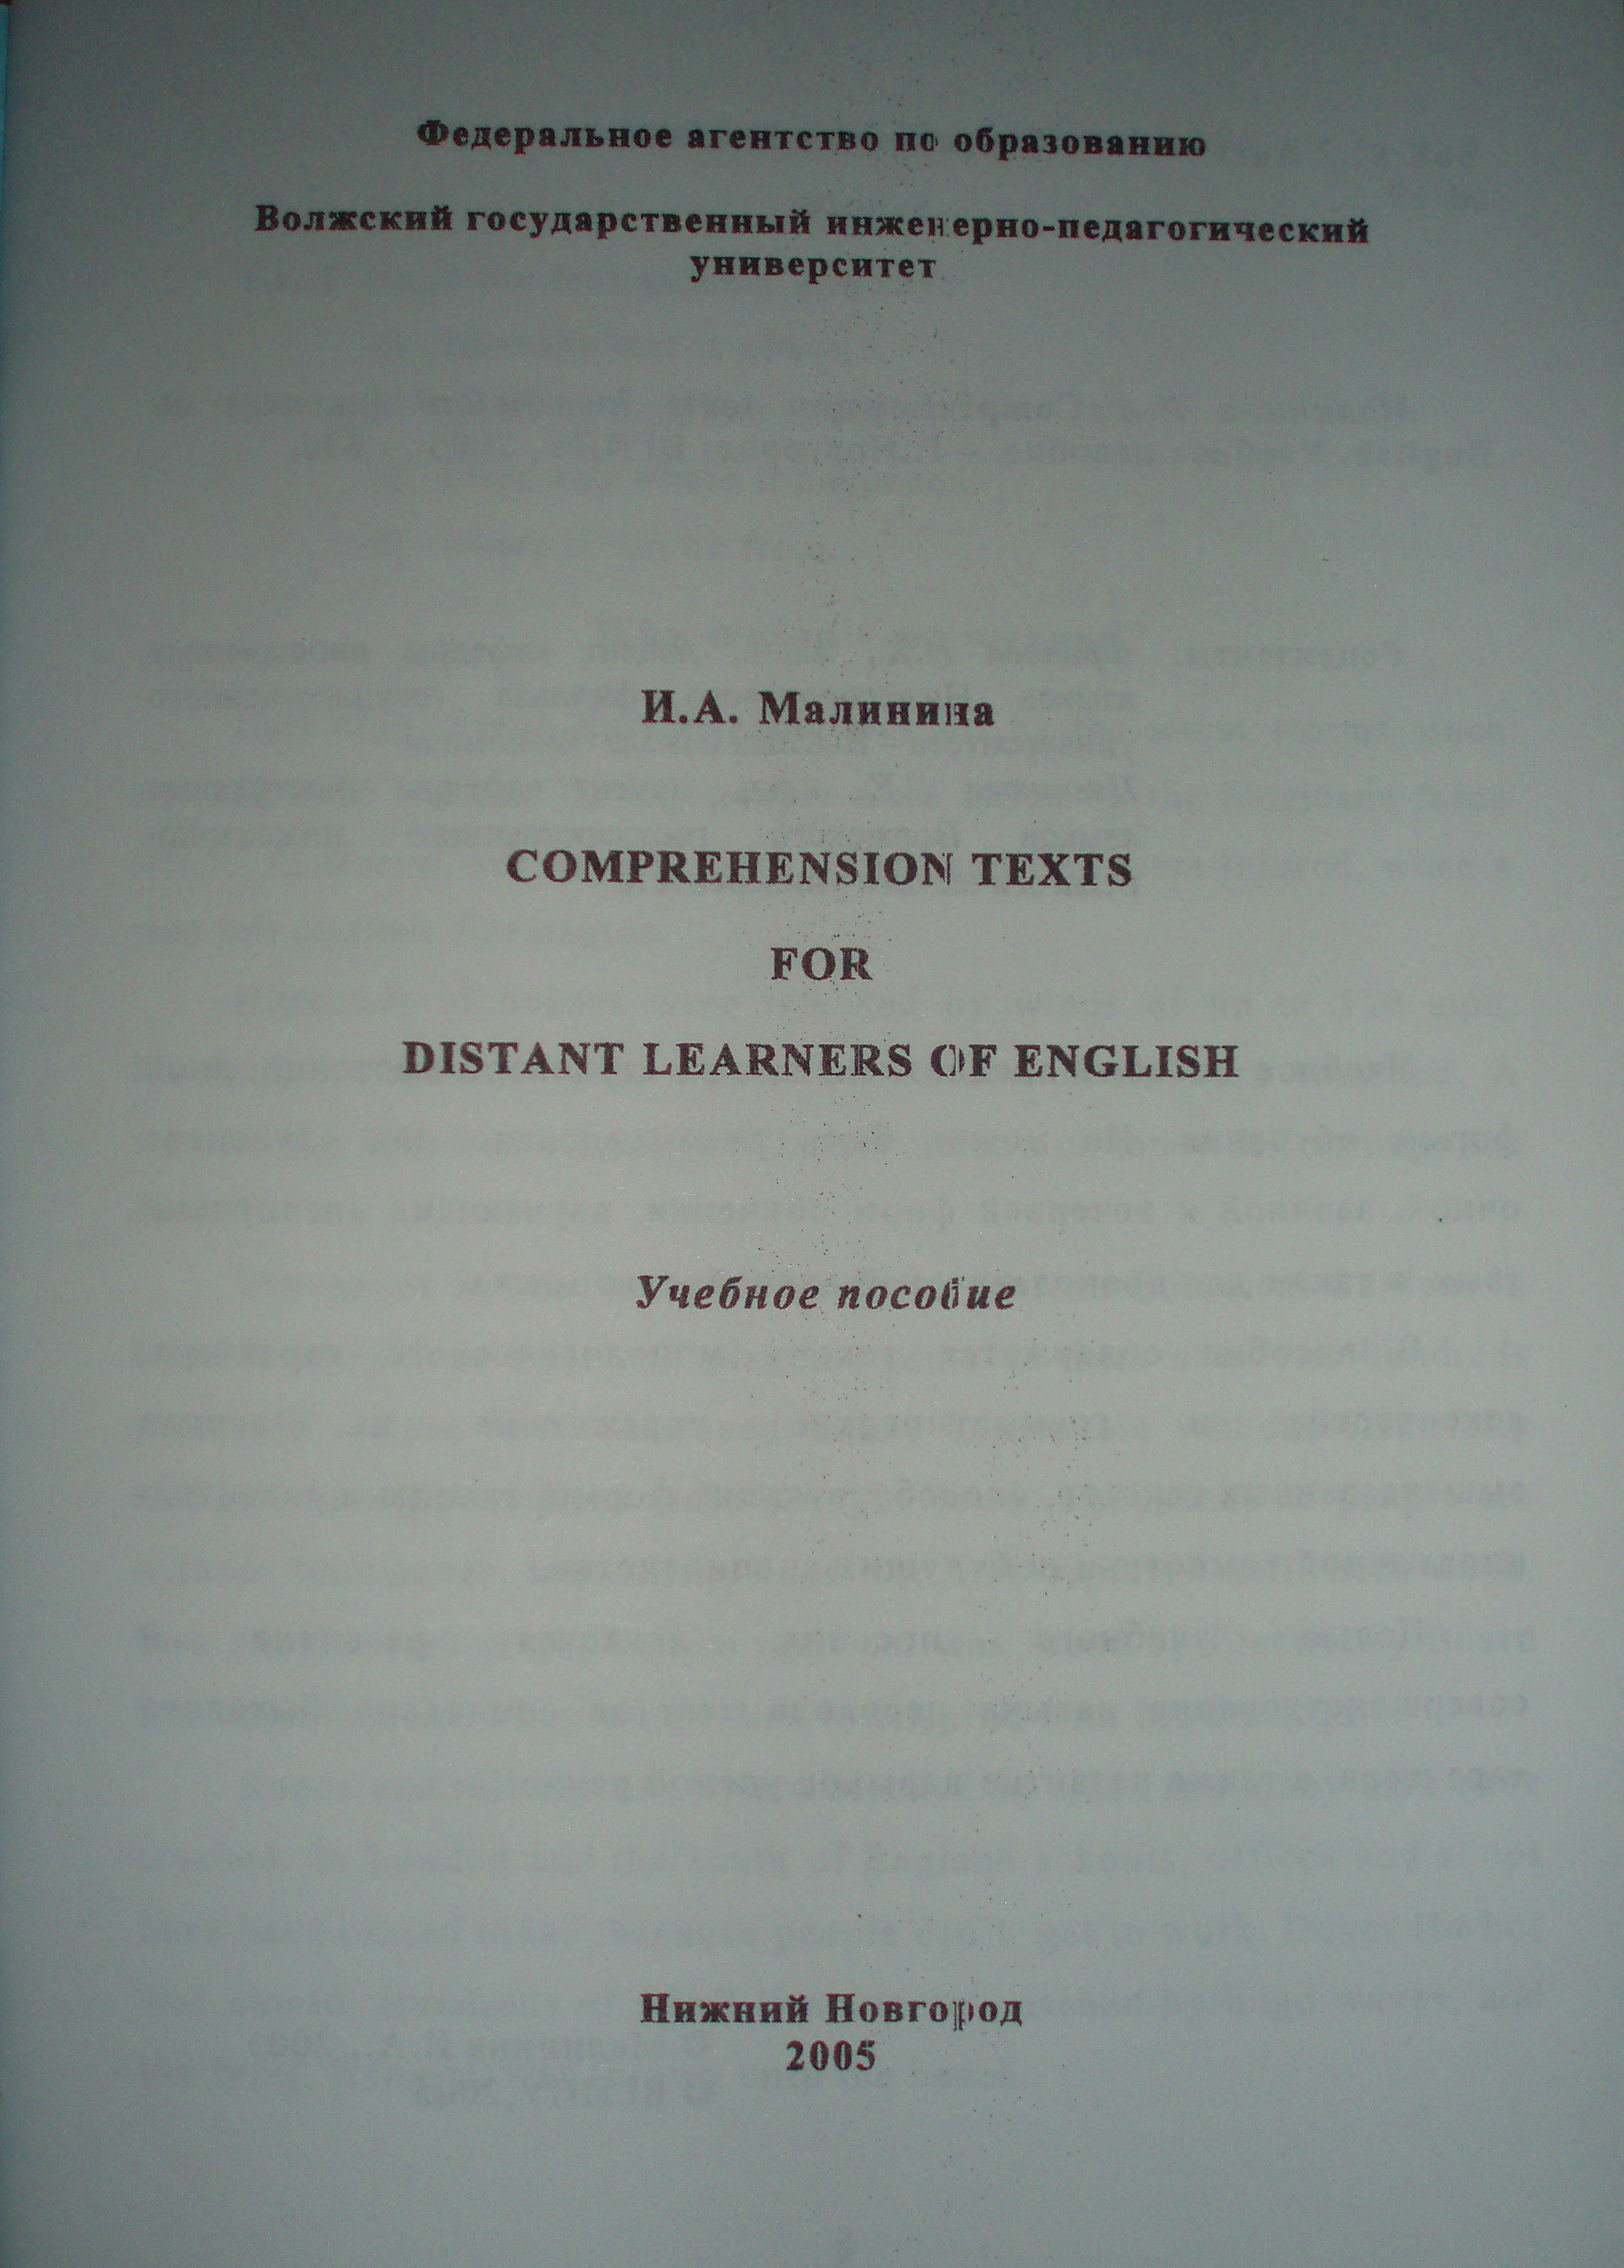 Comprehension texts for distant learners of English